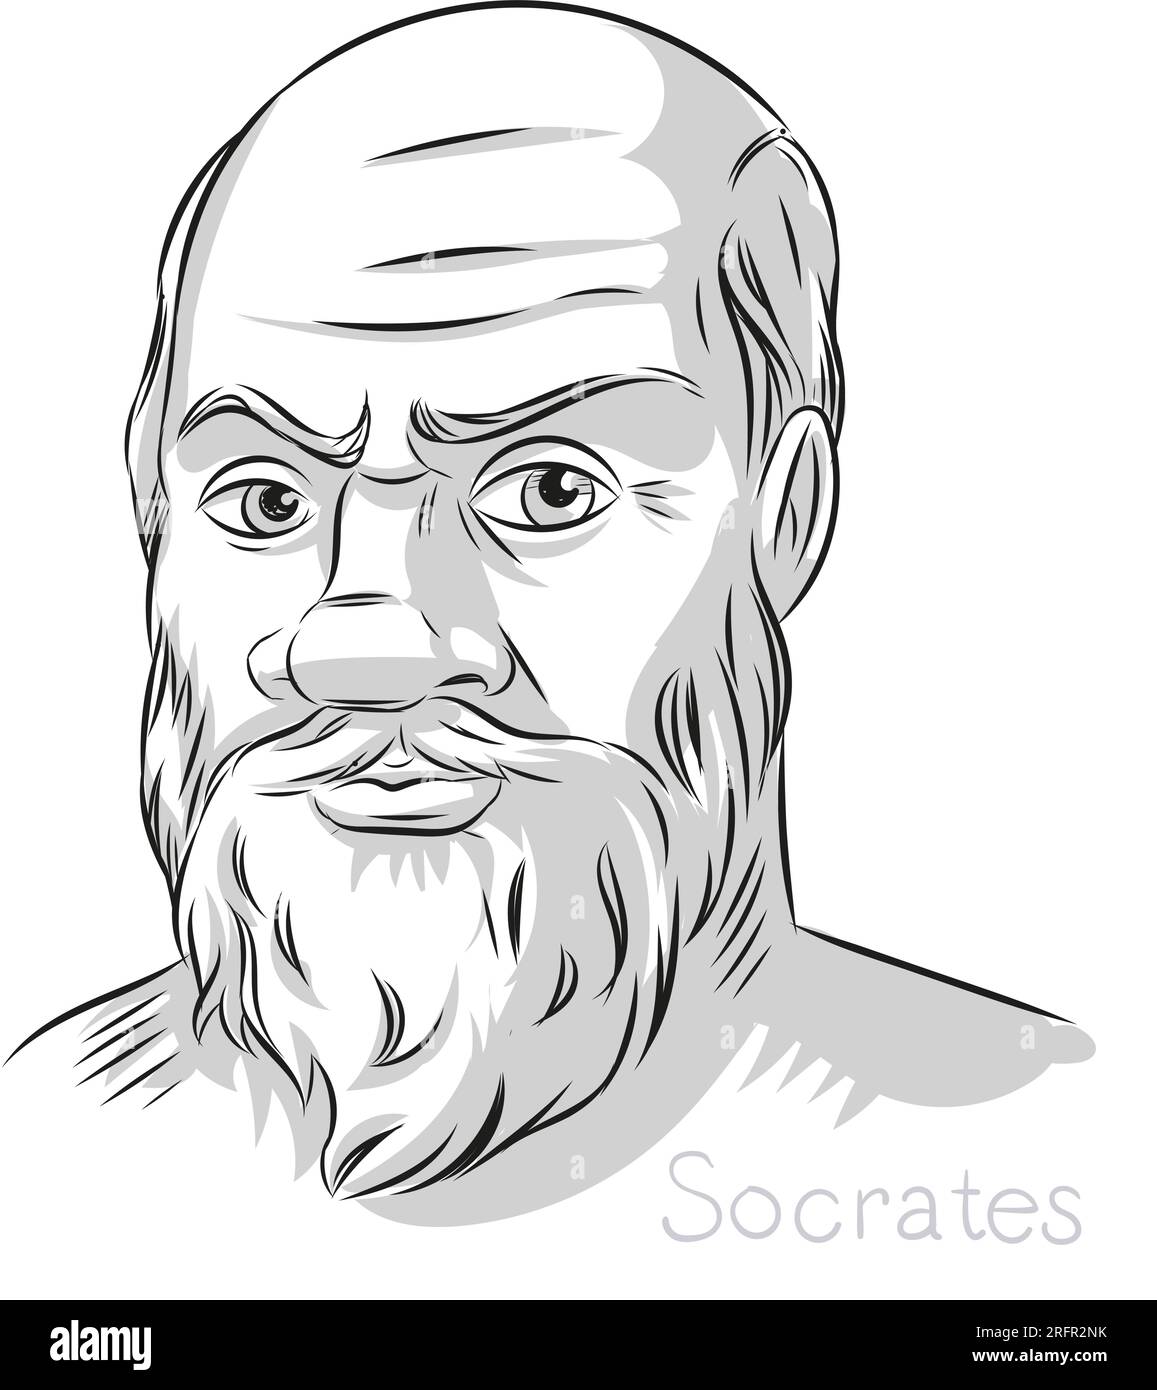 Socrates bust kept in louvre museum, old illustration. by unidentified  author, published on magasin pittoresque, paris, 1843. | CanStock